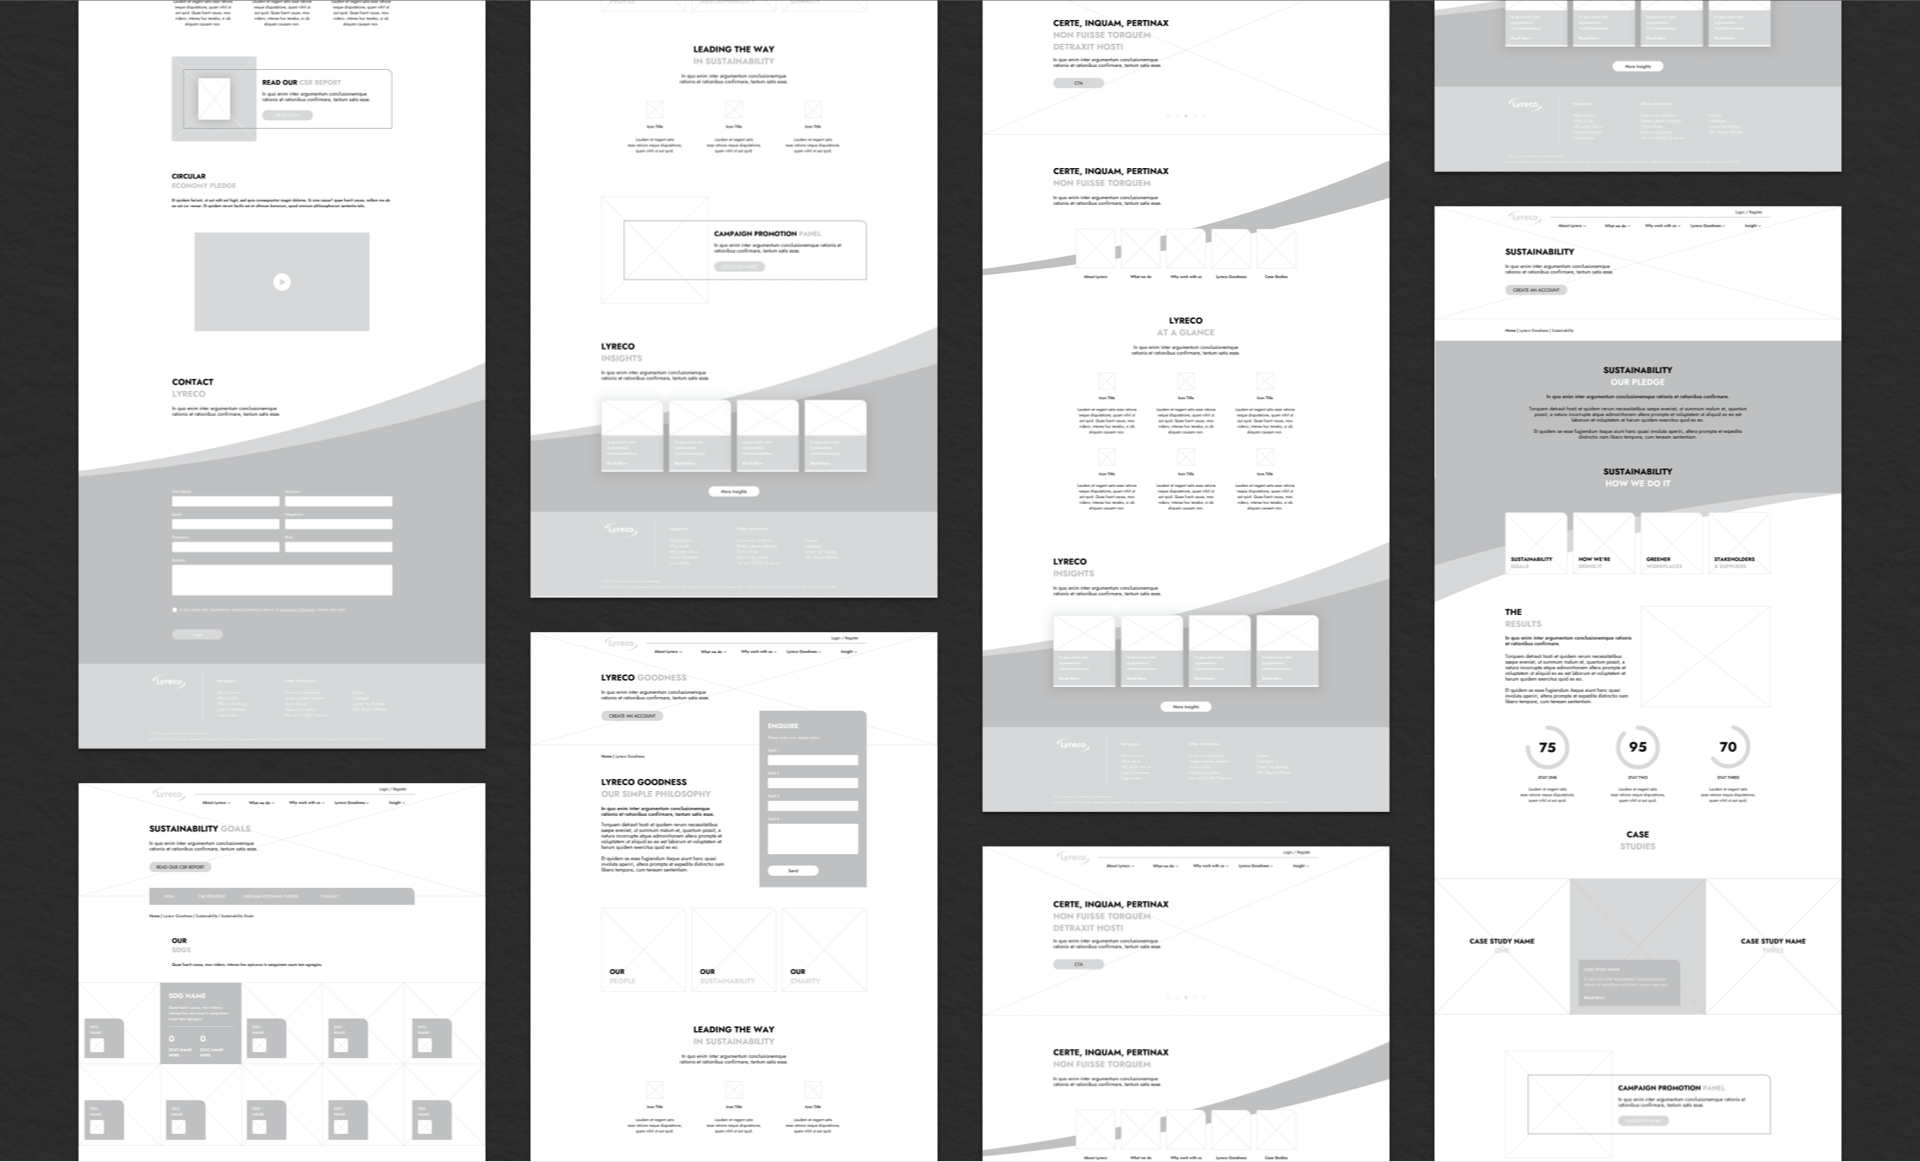 Lyreco Goodness wireframes created by OneAgency